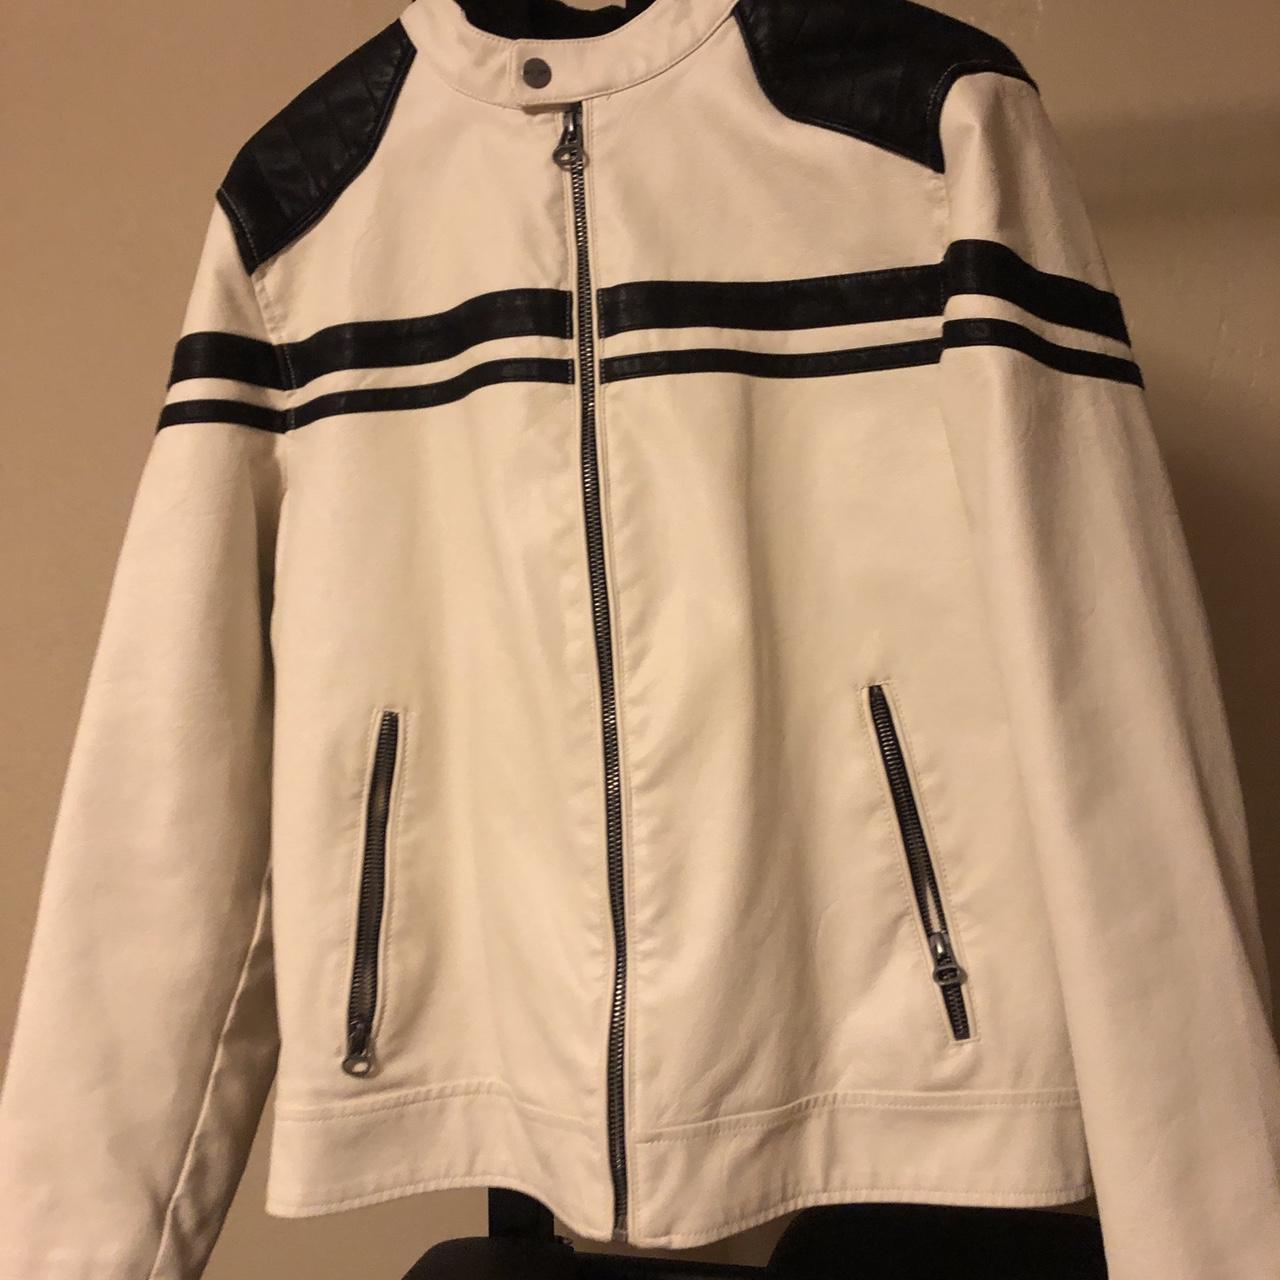 Wilson’s Leather Men's White and Black Jacket